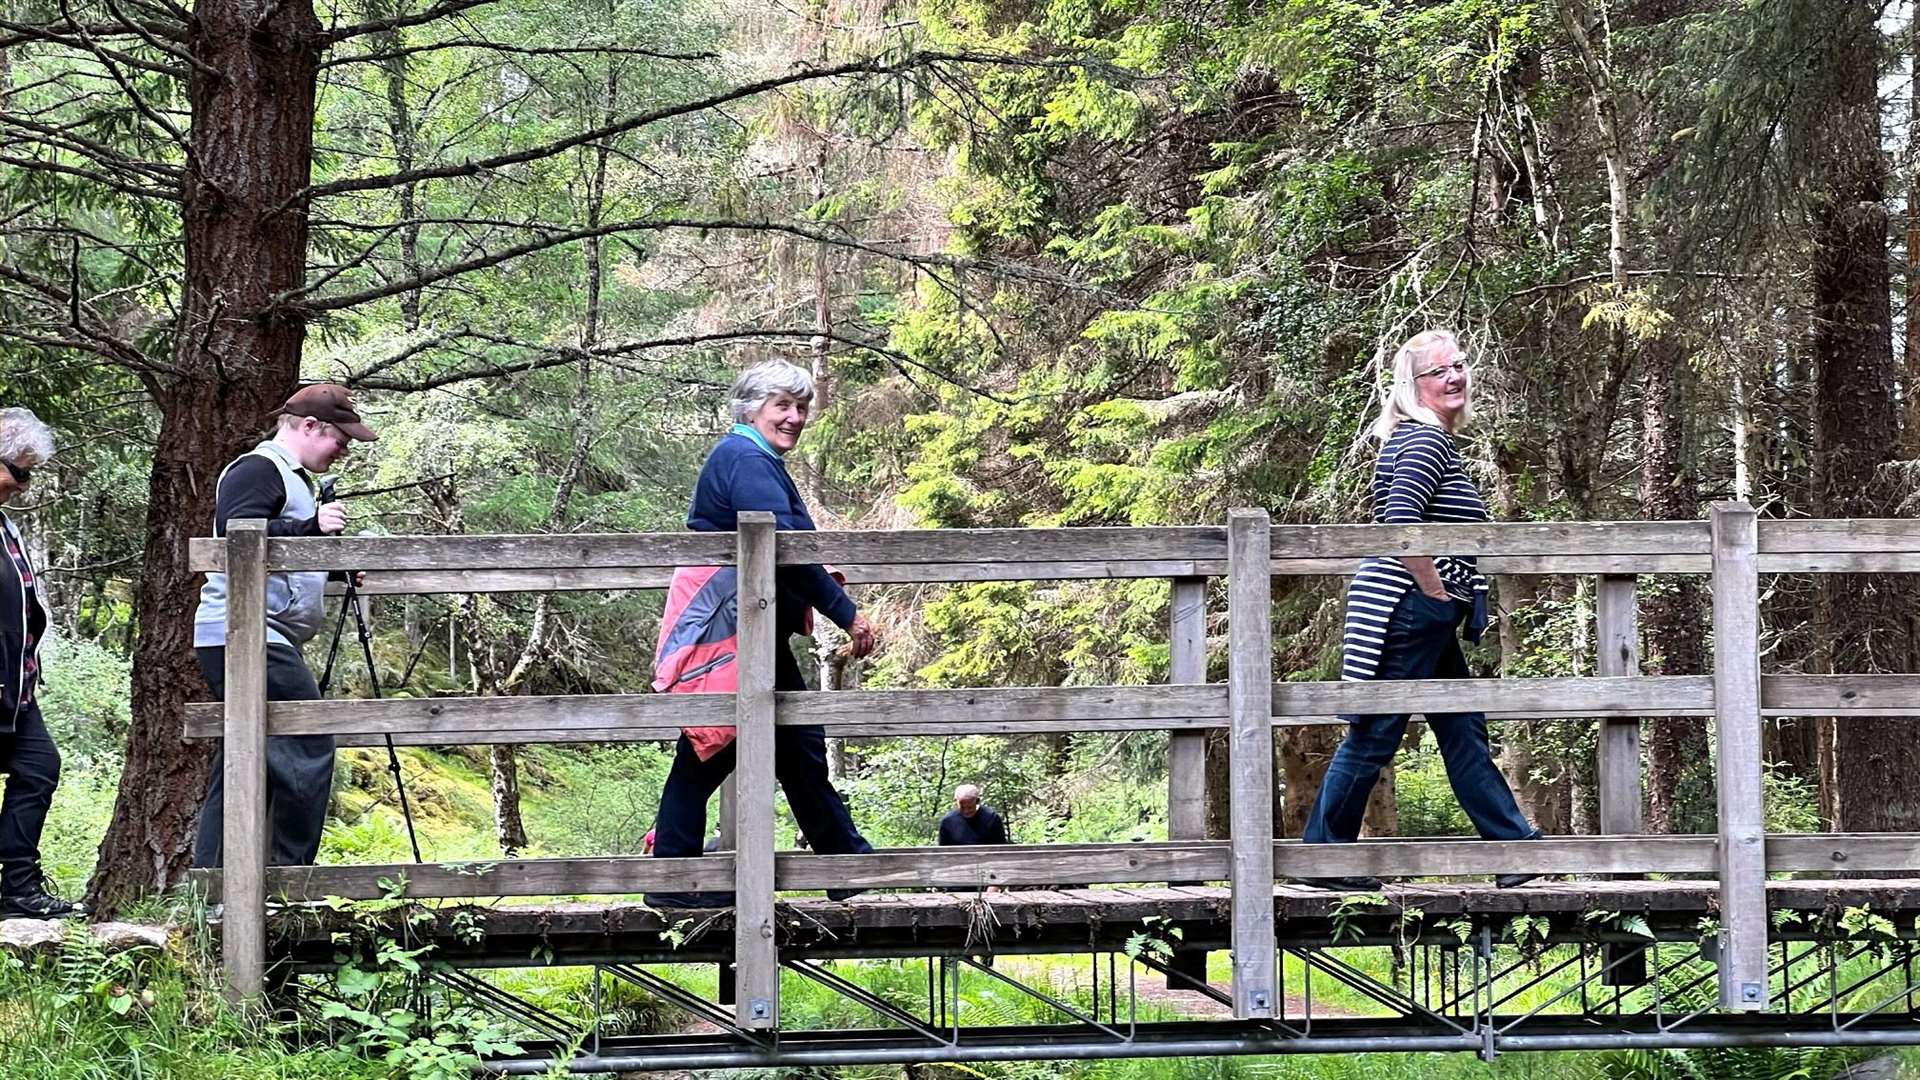 Members of the Tongue Walking Group on one of their health walks.